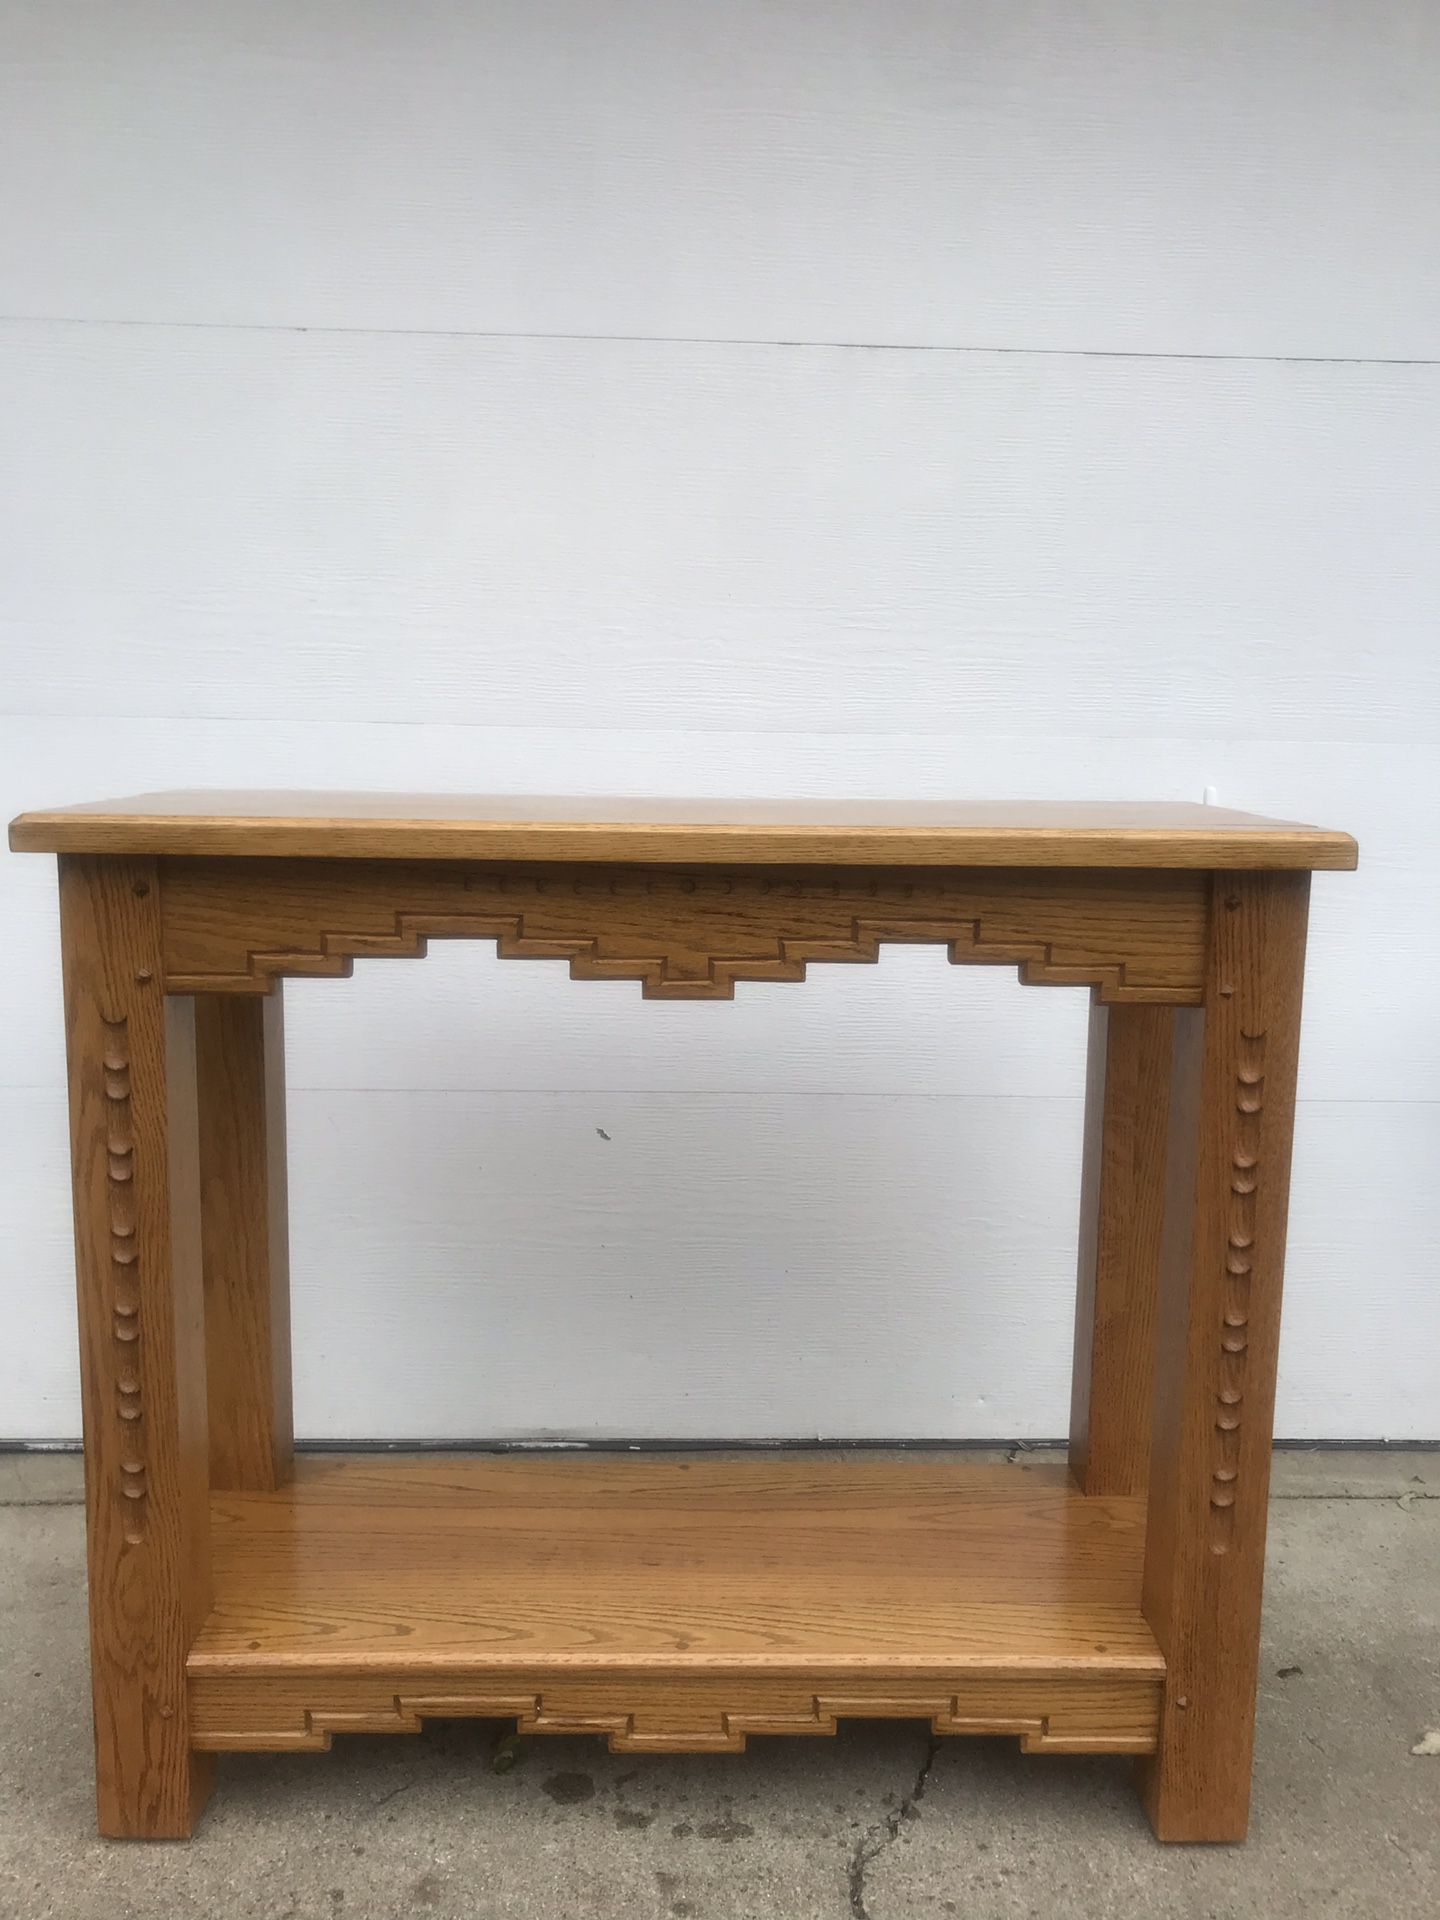 Solid oak console table- kitchen island